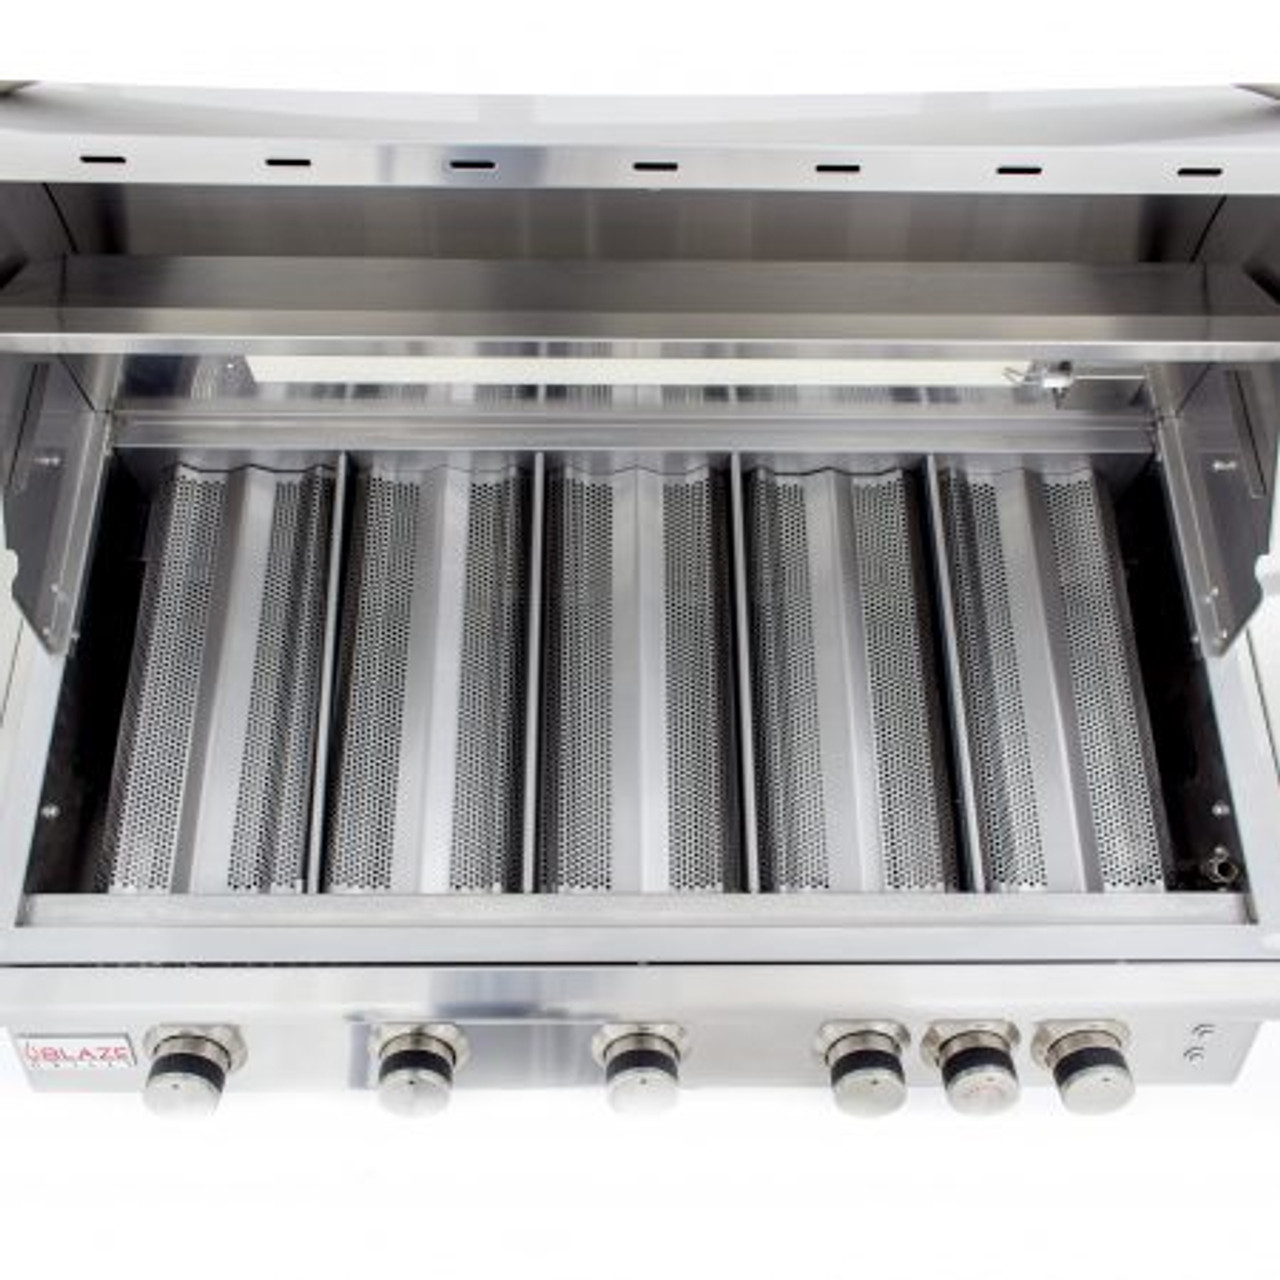 Blaze LTE 30-inch Built-In Gas Griddle with Lights - Propane - BLZ